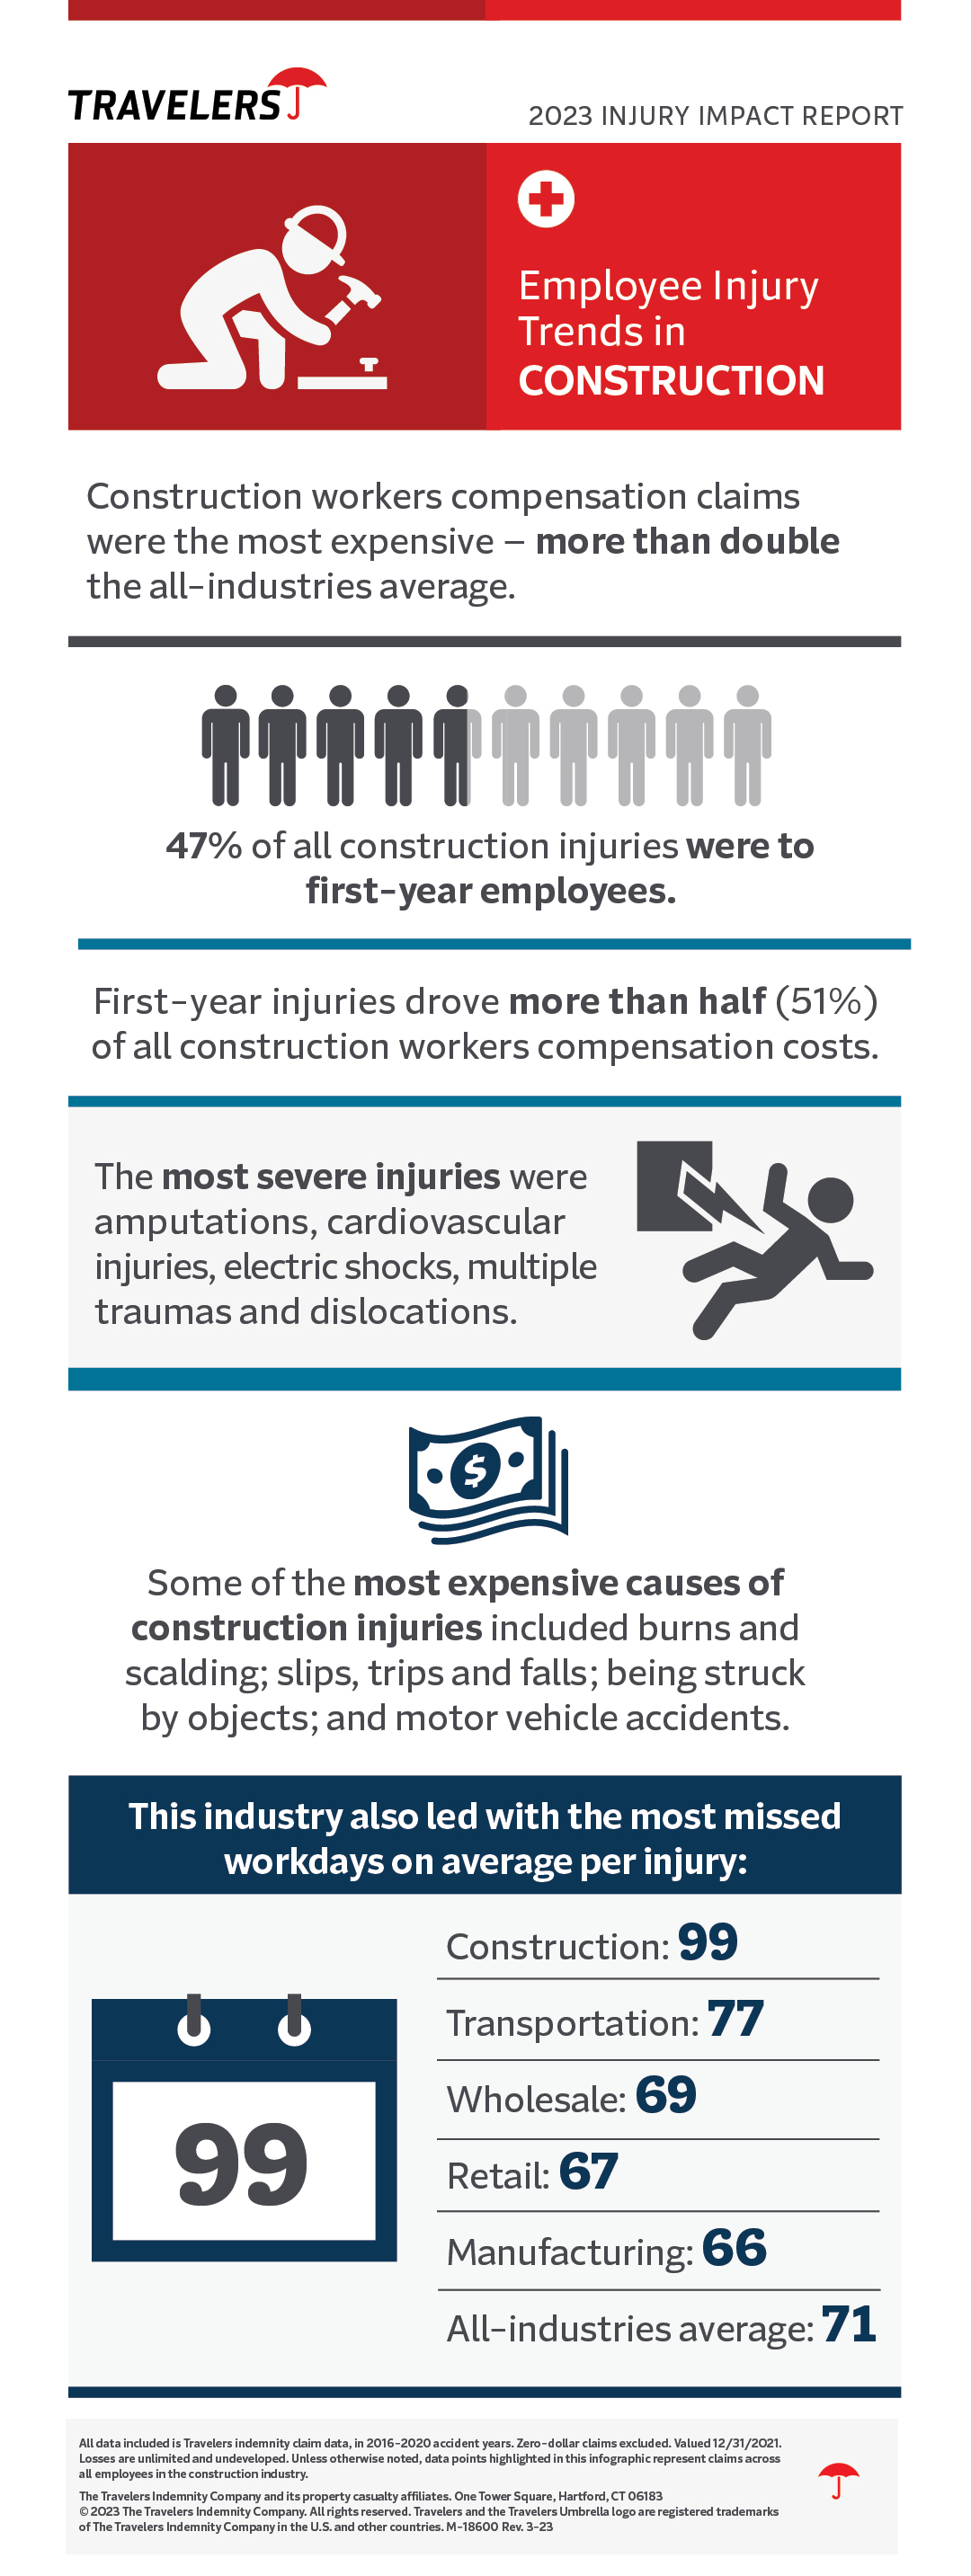 2023 Employee Injury Trends in Construction infographic, see details below